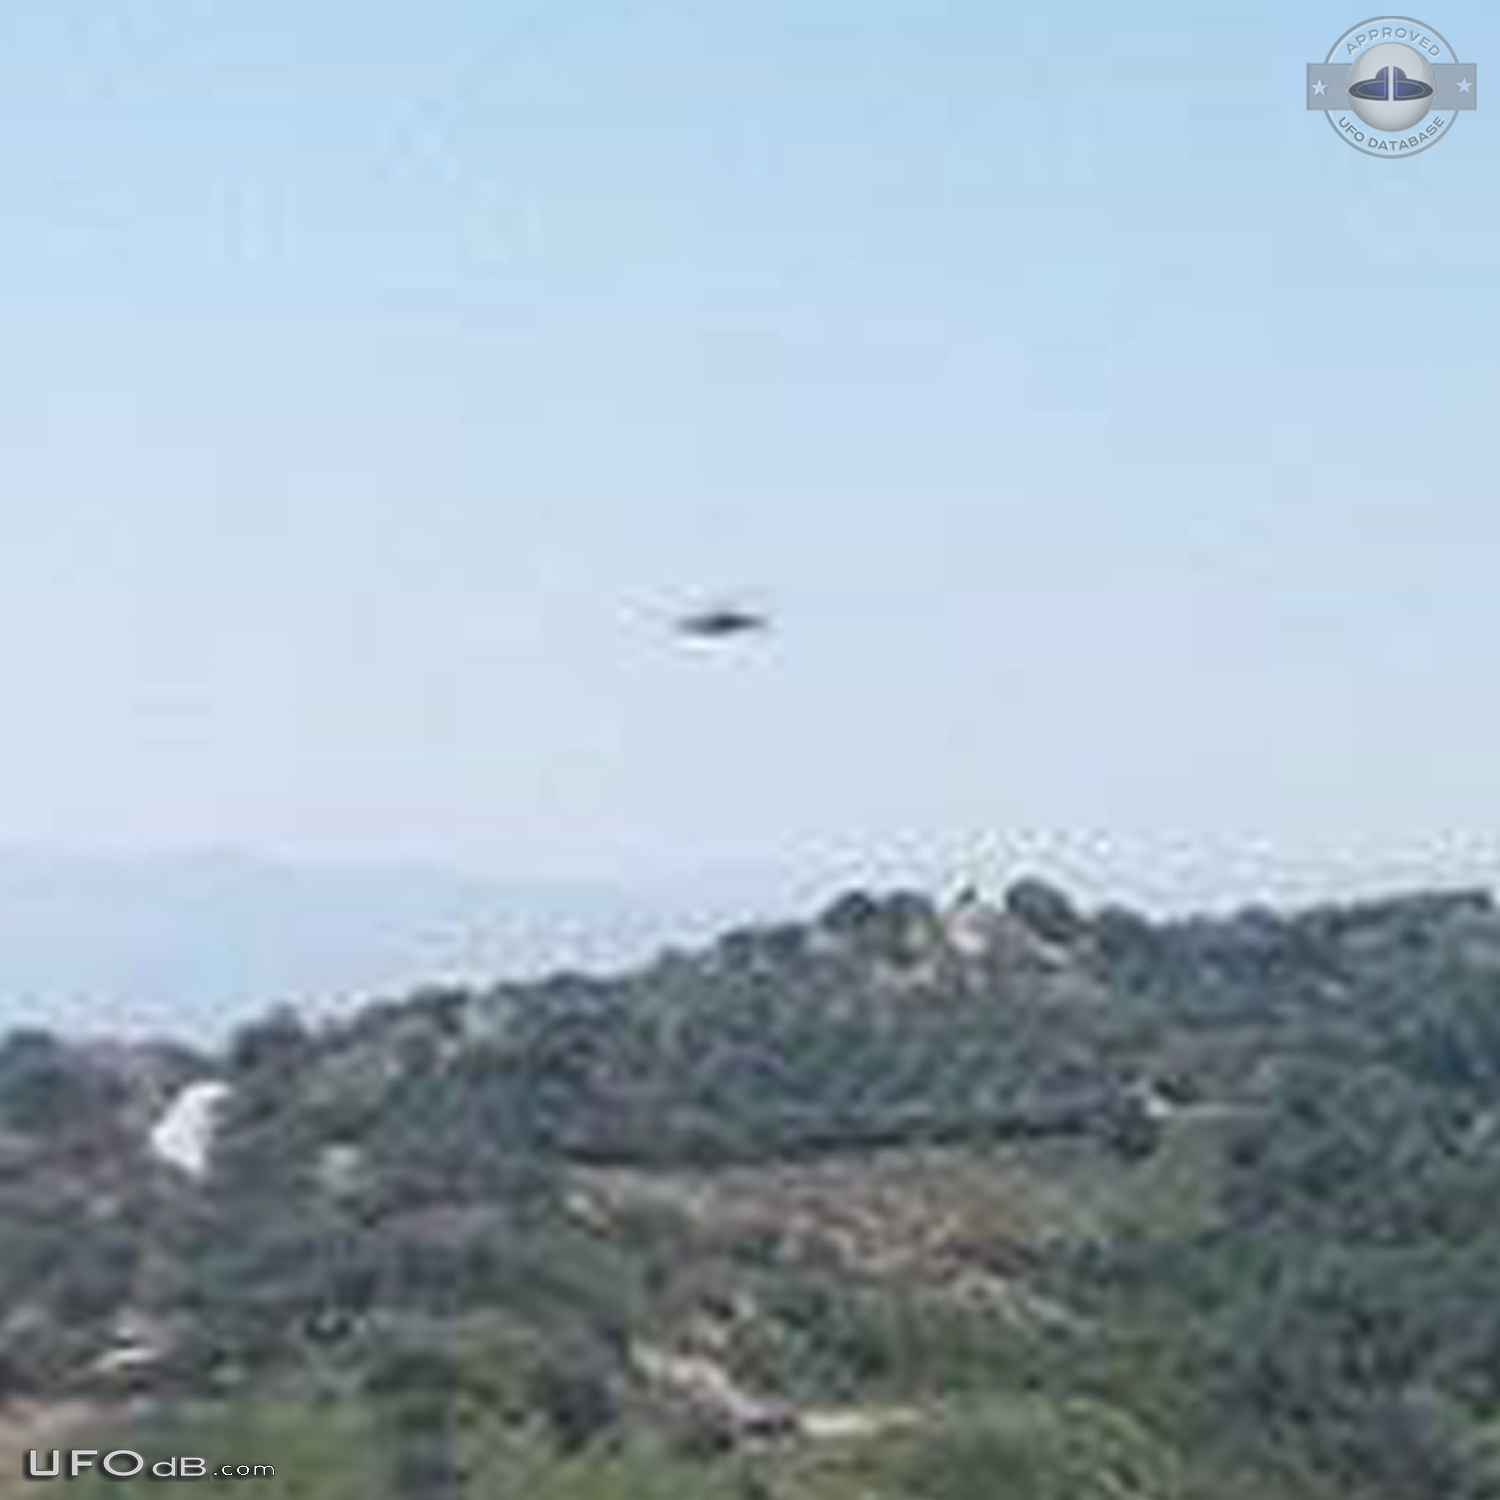 Watching photo at once I recognize the UFO hovering - Fier Albania UFO Picture #749-4